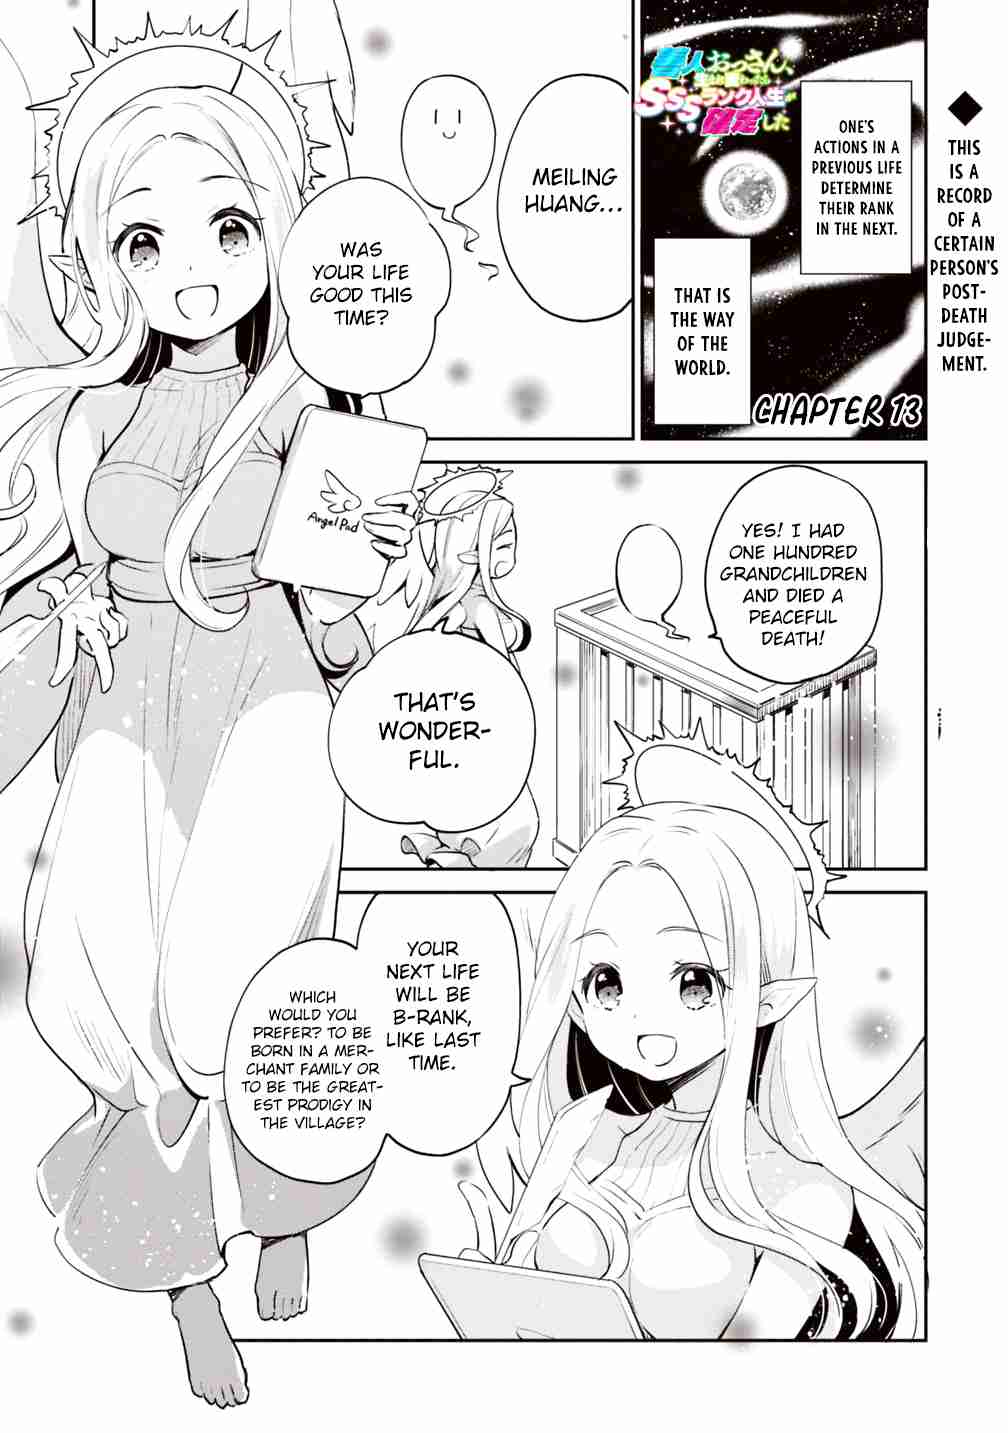 Your SSS rank Afterlife is Confirmed, Virtuous Old Man Vol. 1 Ch. 13